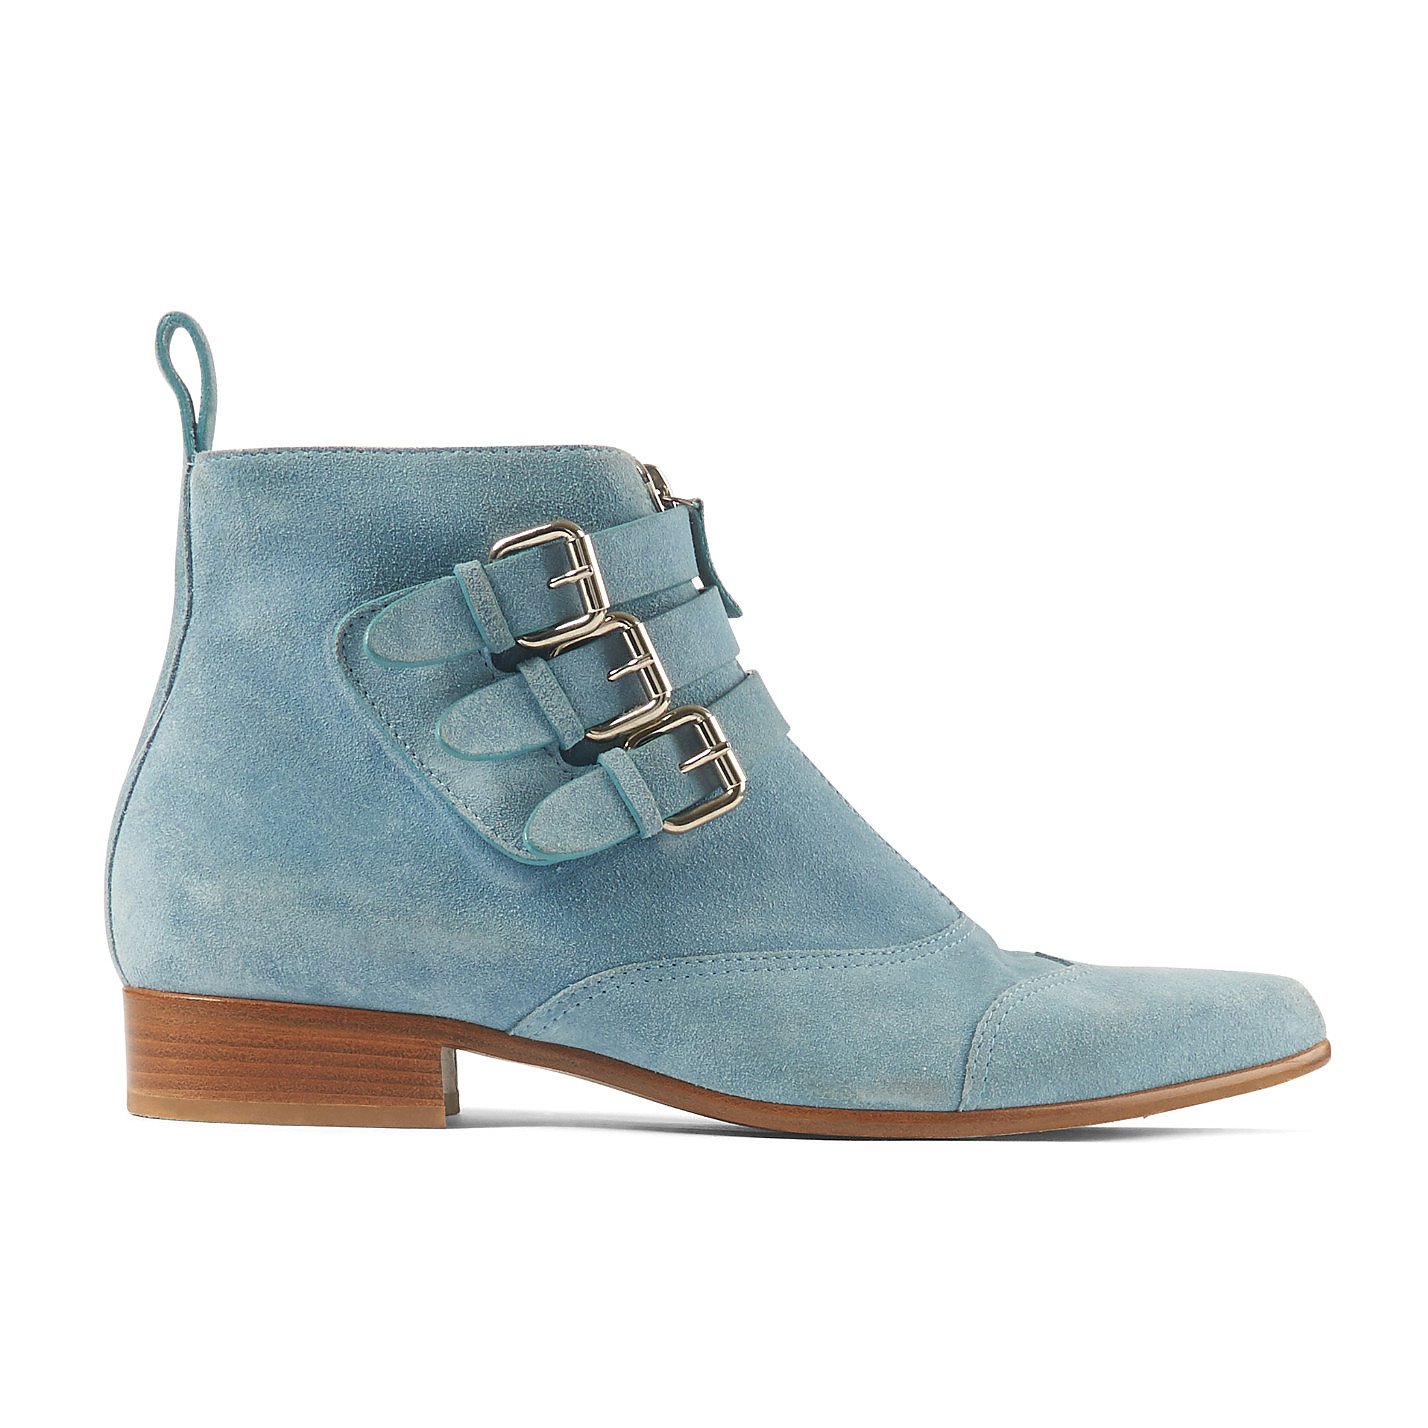 Tabitha Simmons Suede Ankle Boots